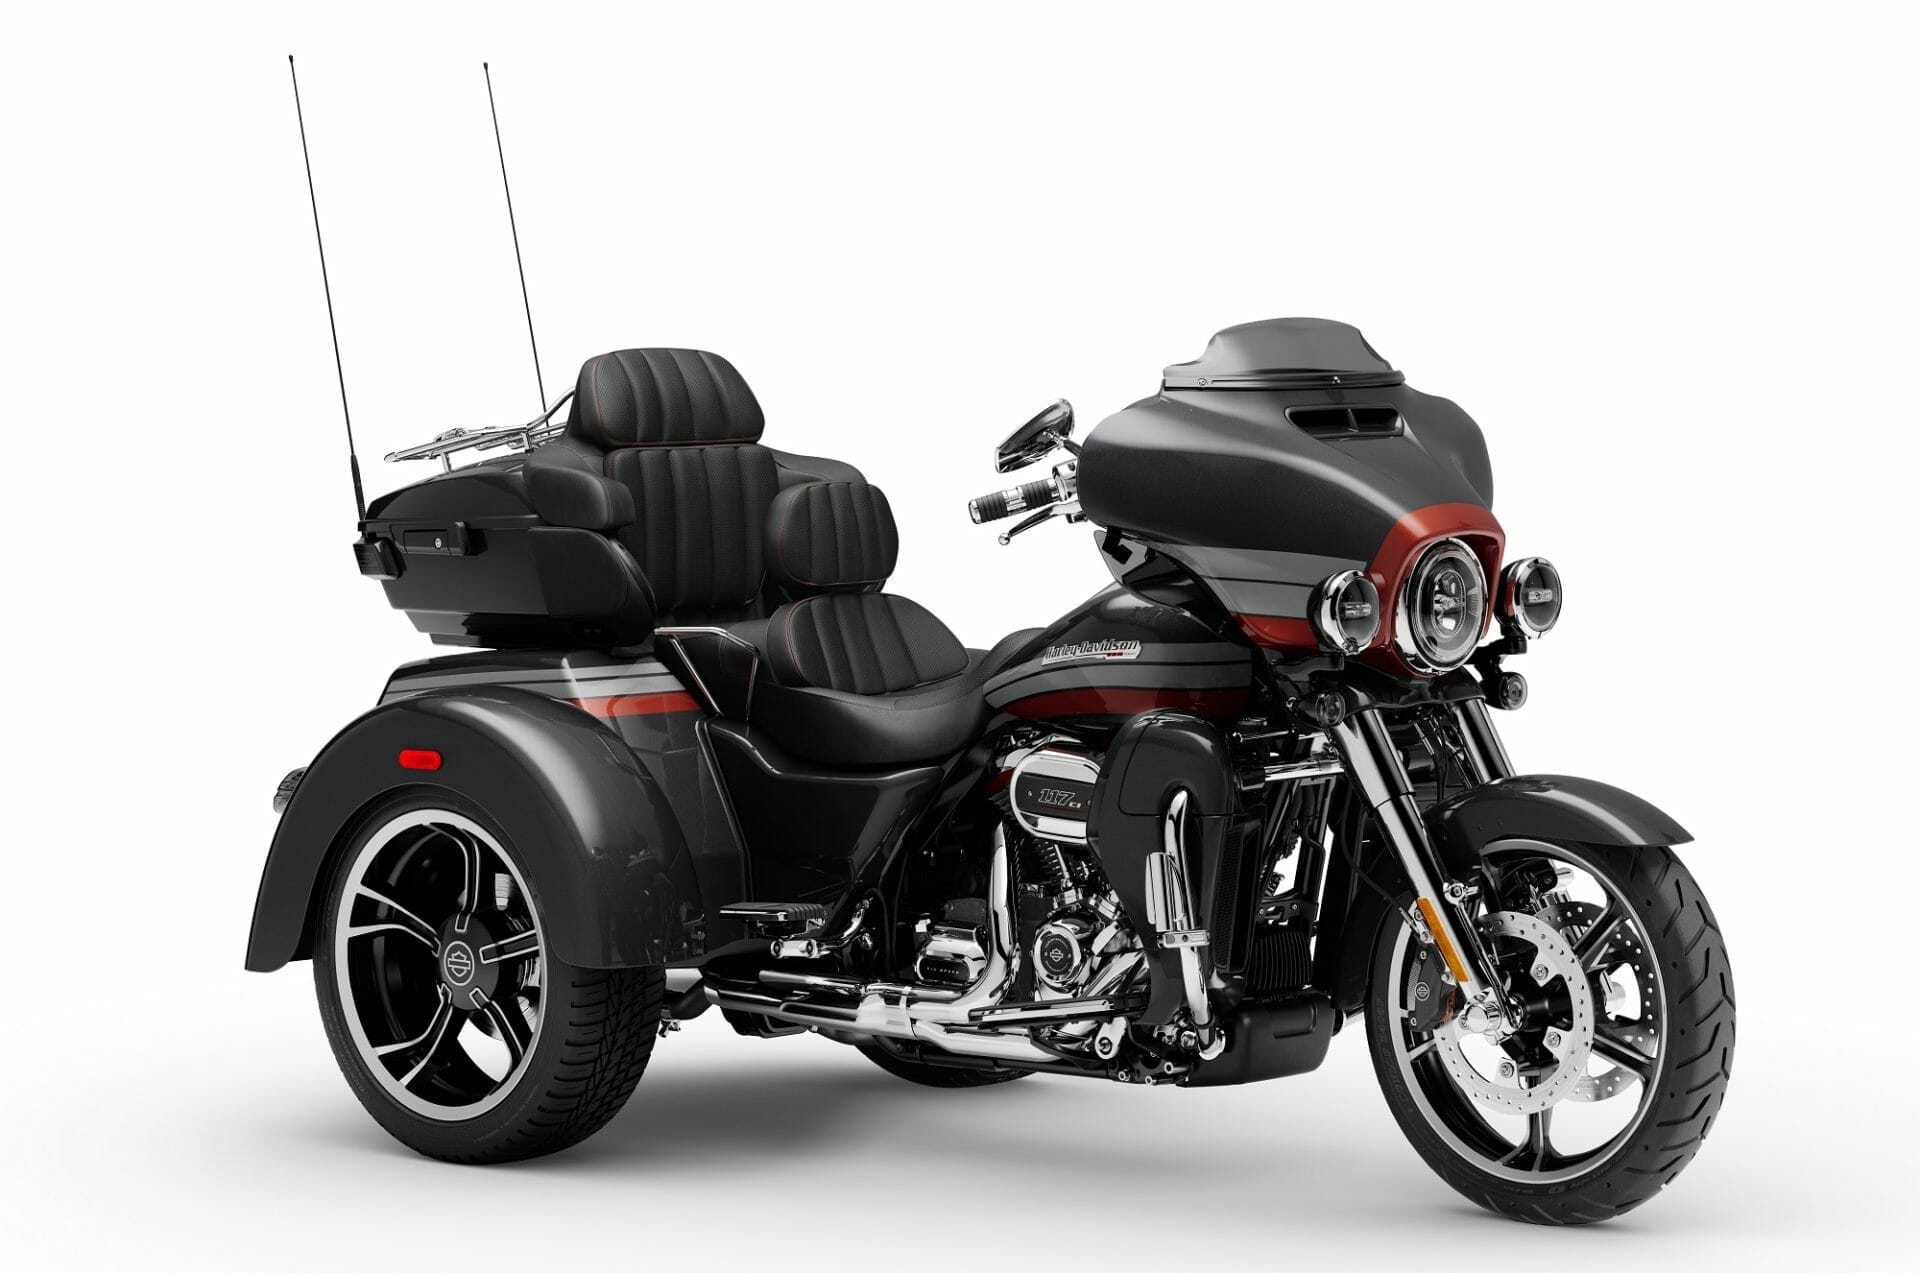 Recall: Harley-Davidson trikes
- also in the APP MOTORCYCLE NEWS